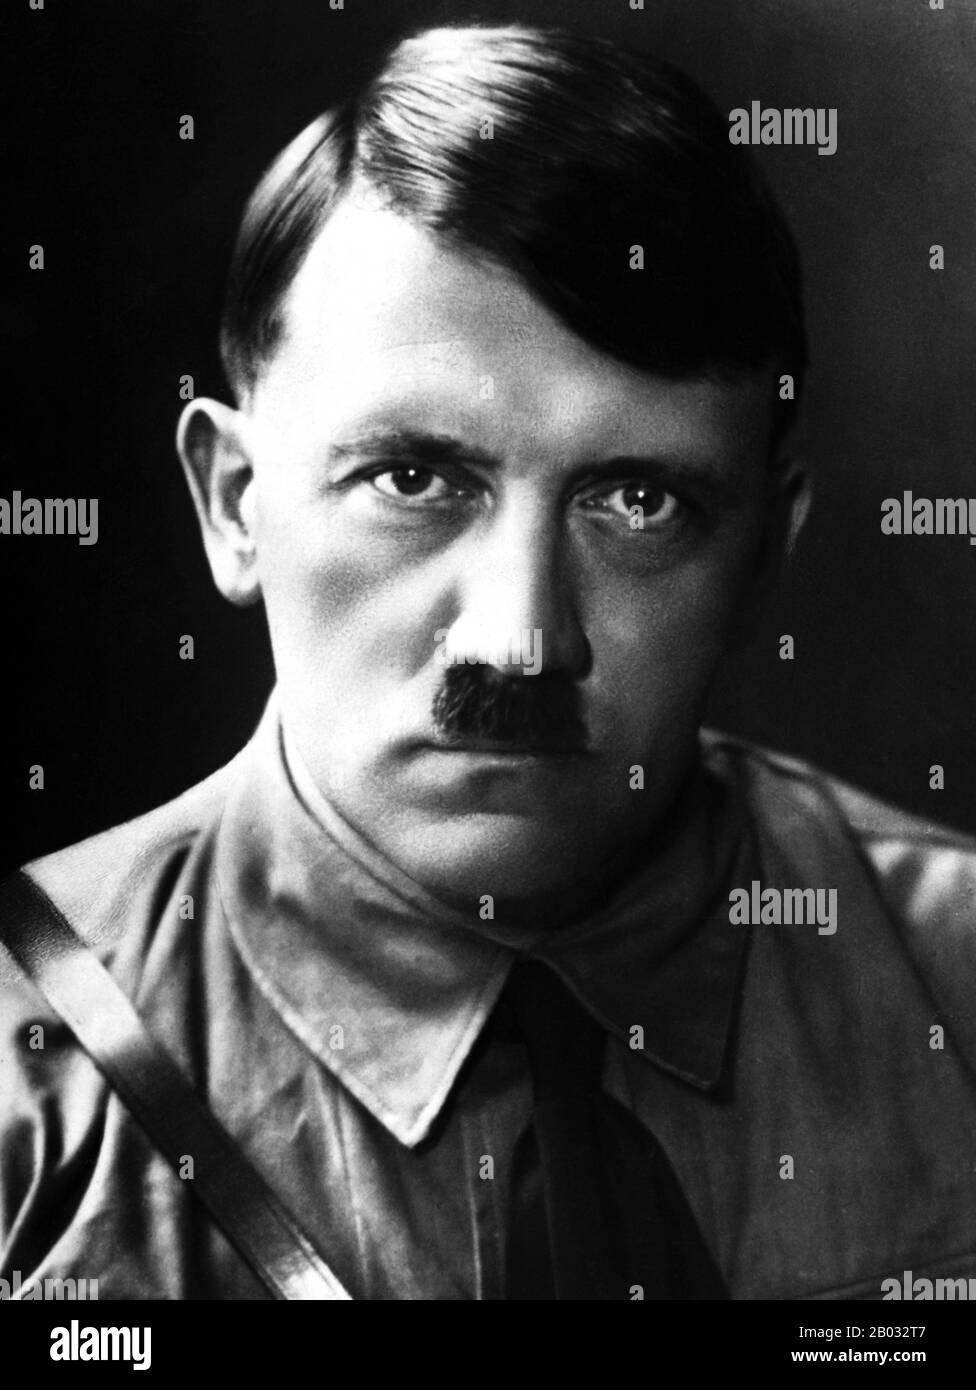 Adolf Hitler (20 April 1889 – 30 April 1945) was a German politician of Austrian origin who was the leader of the Nazi Party (NSDAP), Chancellor of Germany from 1933 to 1945, and Führer ('leader') of Nazi Germany from 1934 to 1945.  As dictator of Nazi Germany he initiated World War II in Europe and was a central figure of the Holocaust. Stock Photo